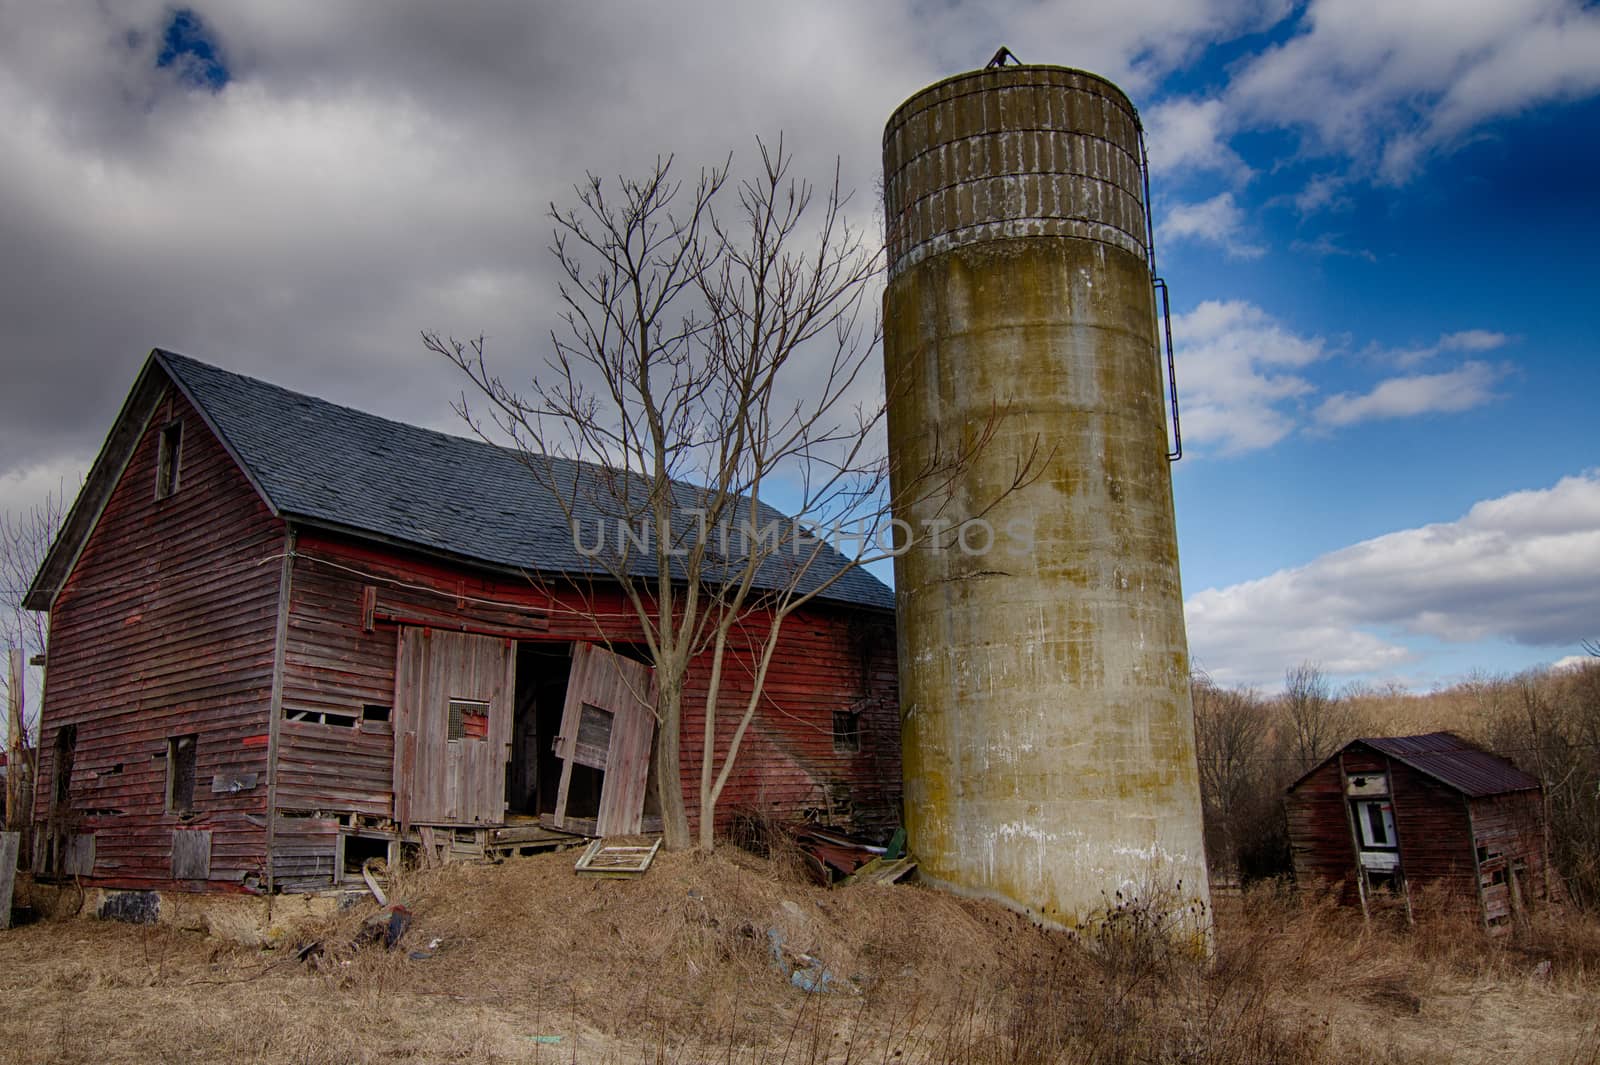 Abandoned barn and silo in New Jersey